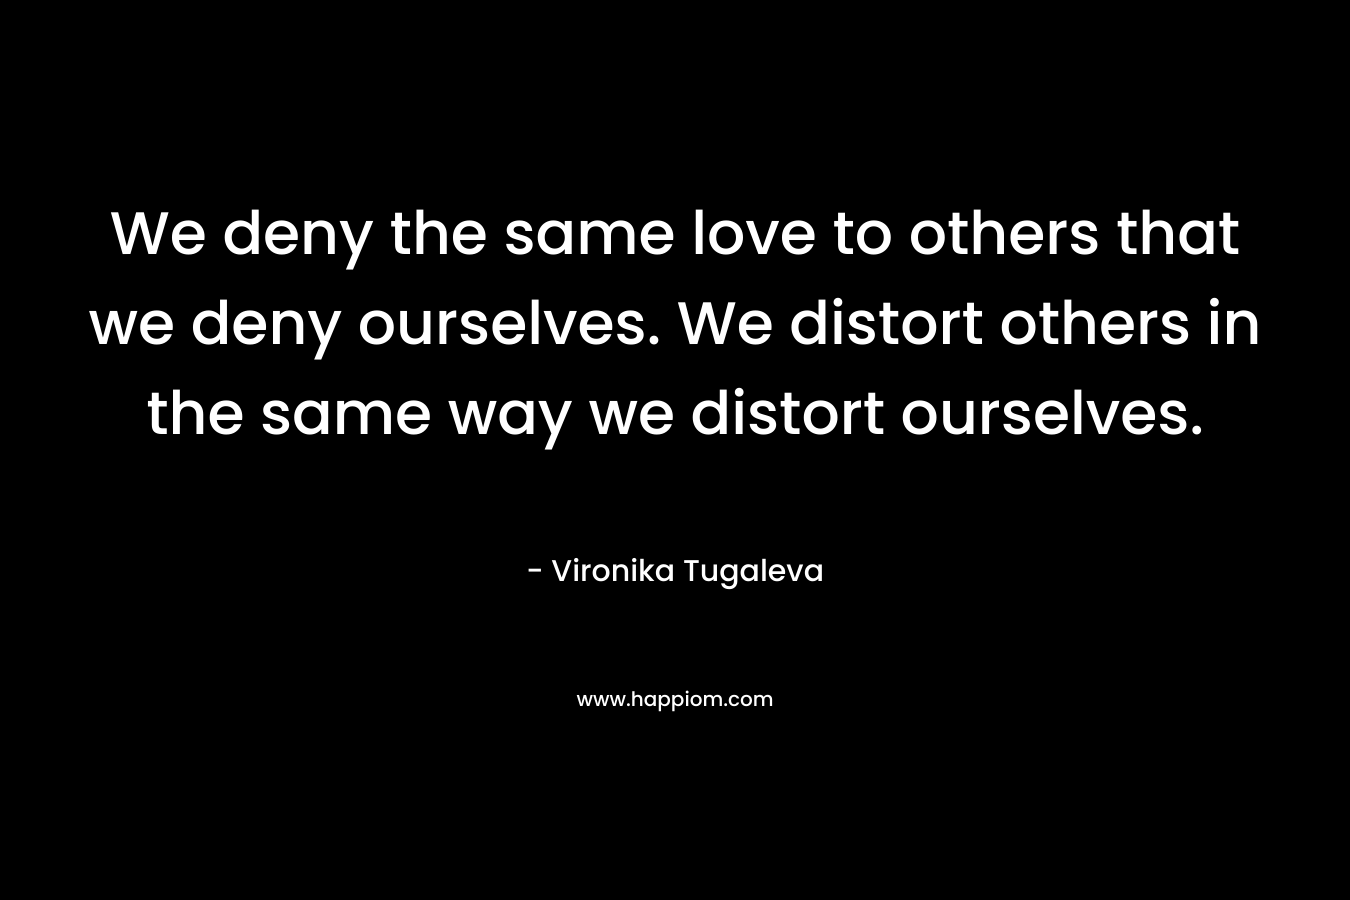 We deny the same love to others that we deny ourselves. We distort others in the same way we distort ourselves.